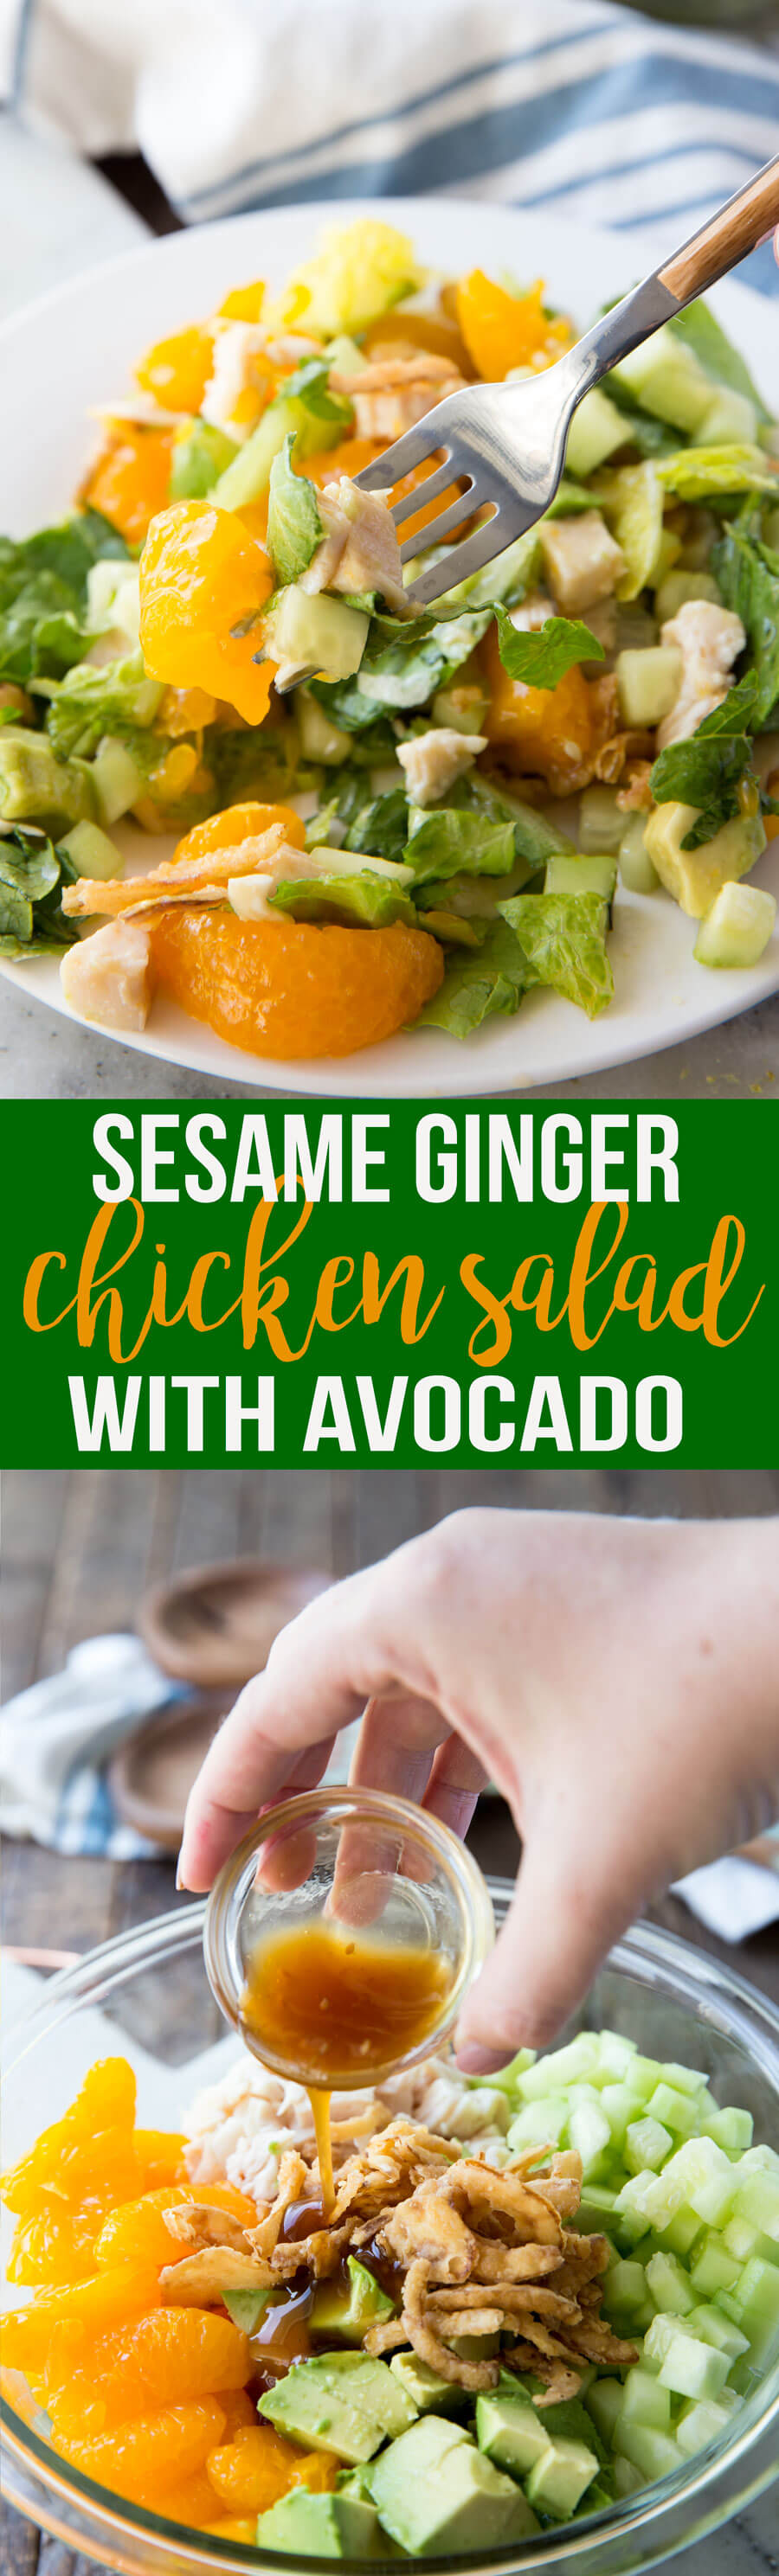 I can't believe how much I love this seasme ginger chicken salad with Avocado! Great flavor, filling, and full of good stuff. 